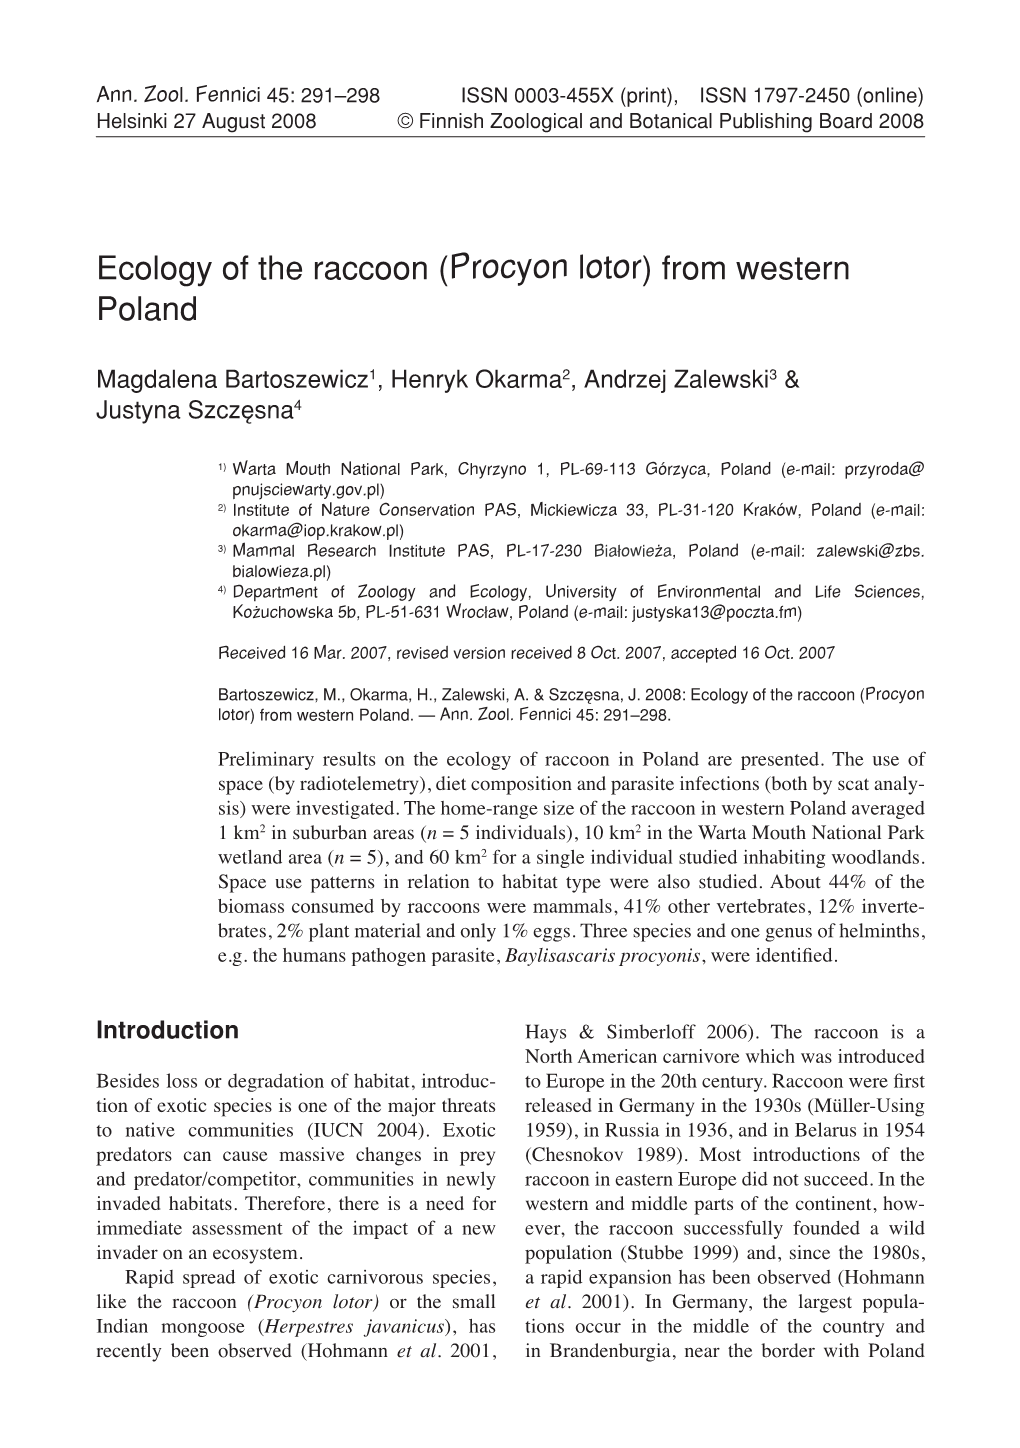 Ecology of the Raccoon (Procyon Lotor) from Western Poland